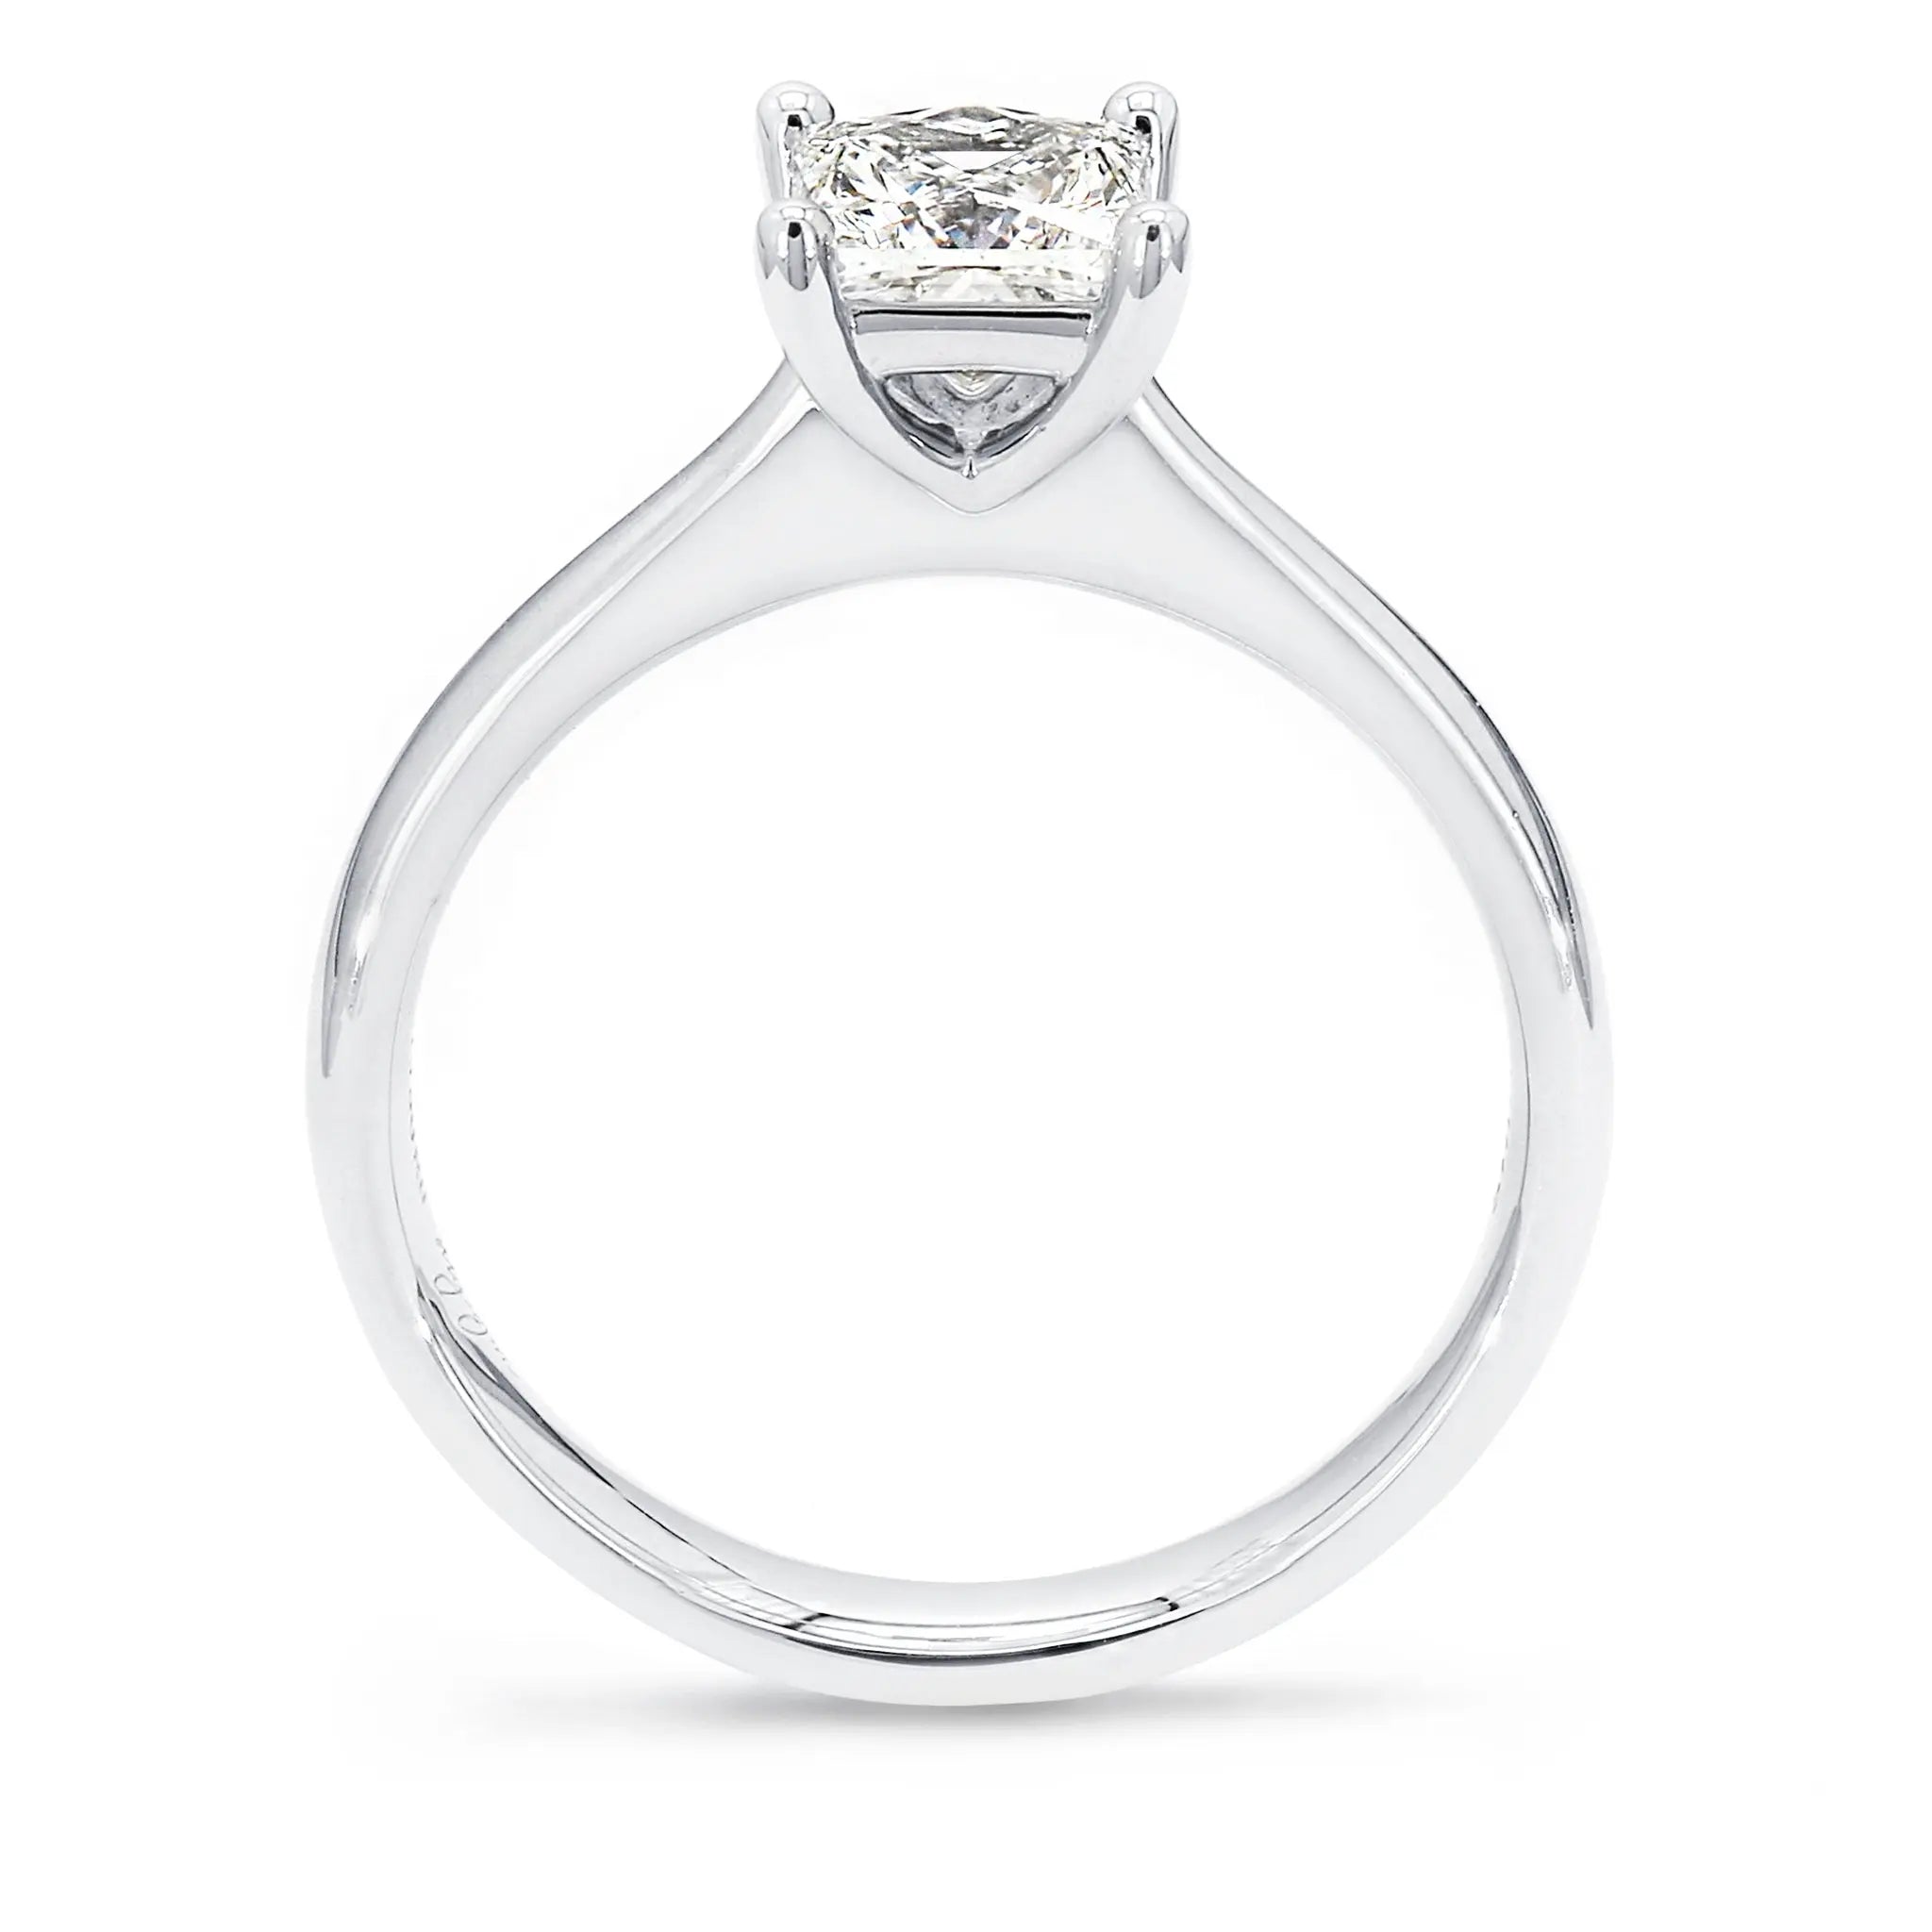 Shimansky - My Girl Solitaire Diamond Engagement Ring 1.00ct Crafted in Patinum